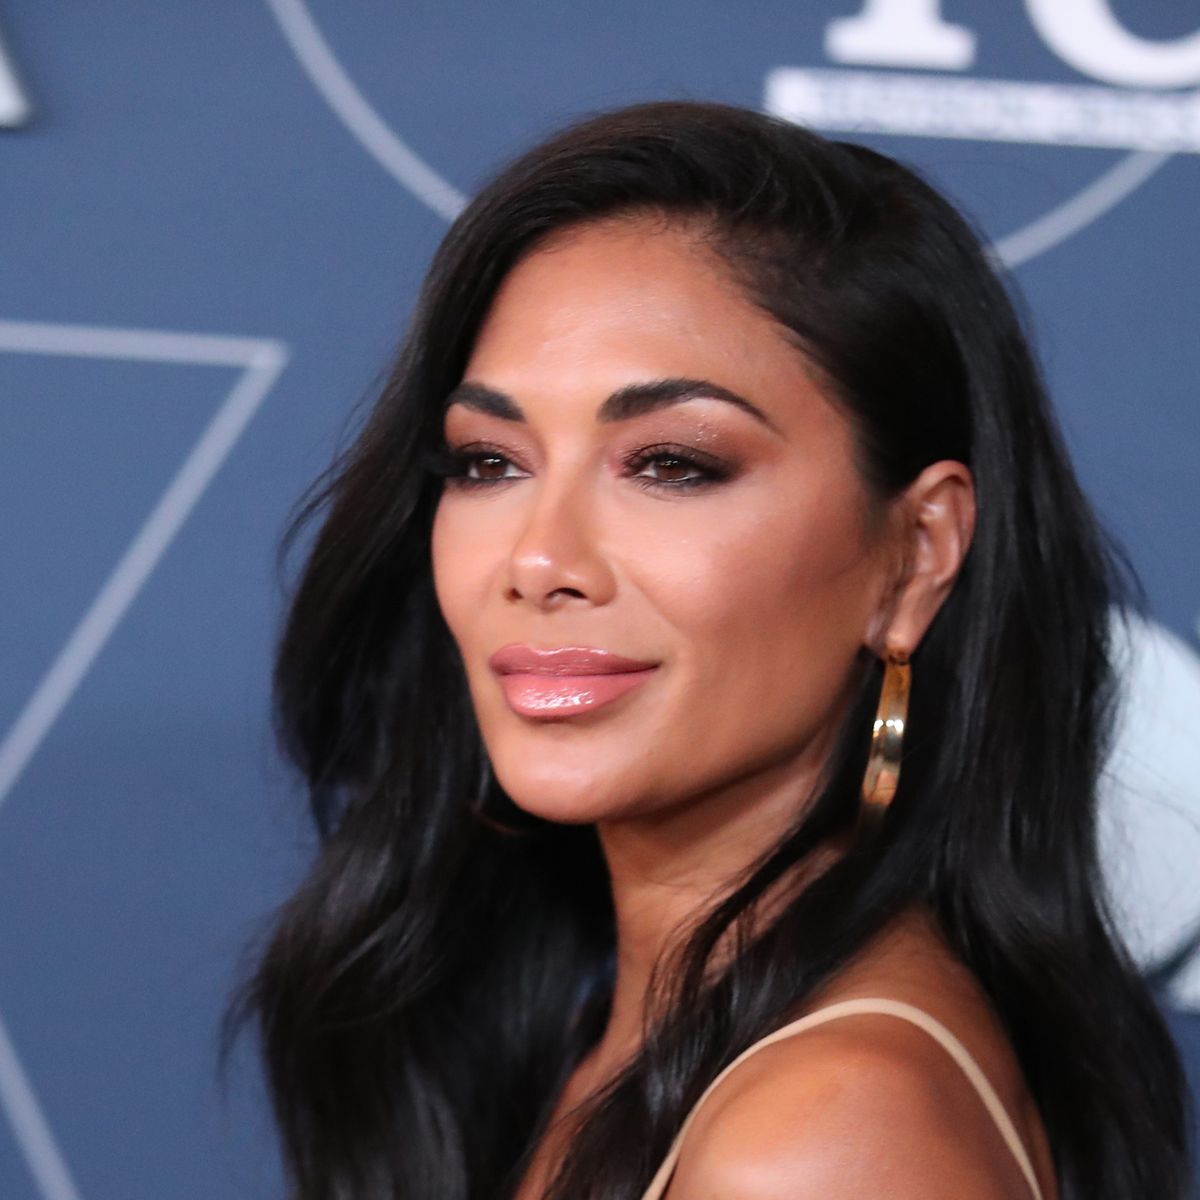 Nicole Scherzinger Has Chiseled Abs In A Floral Bikini In IG Pics